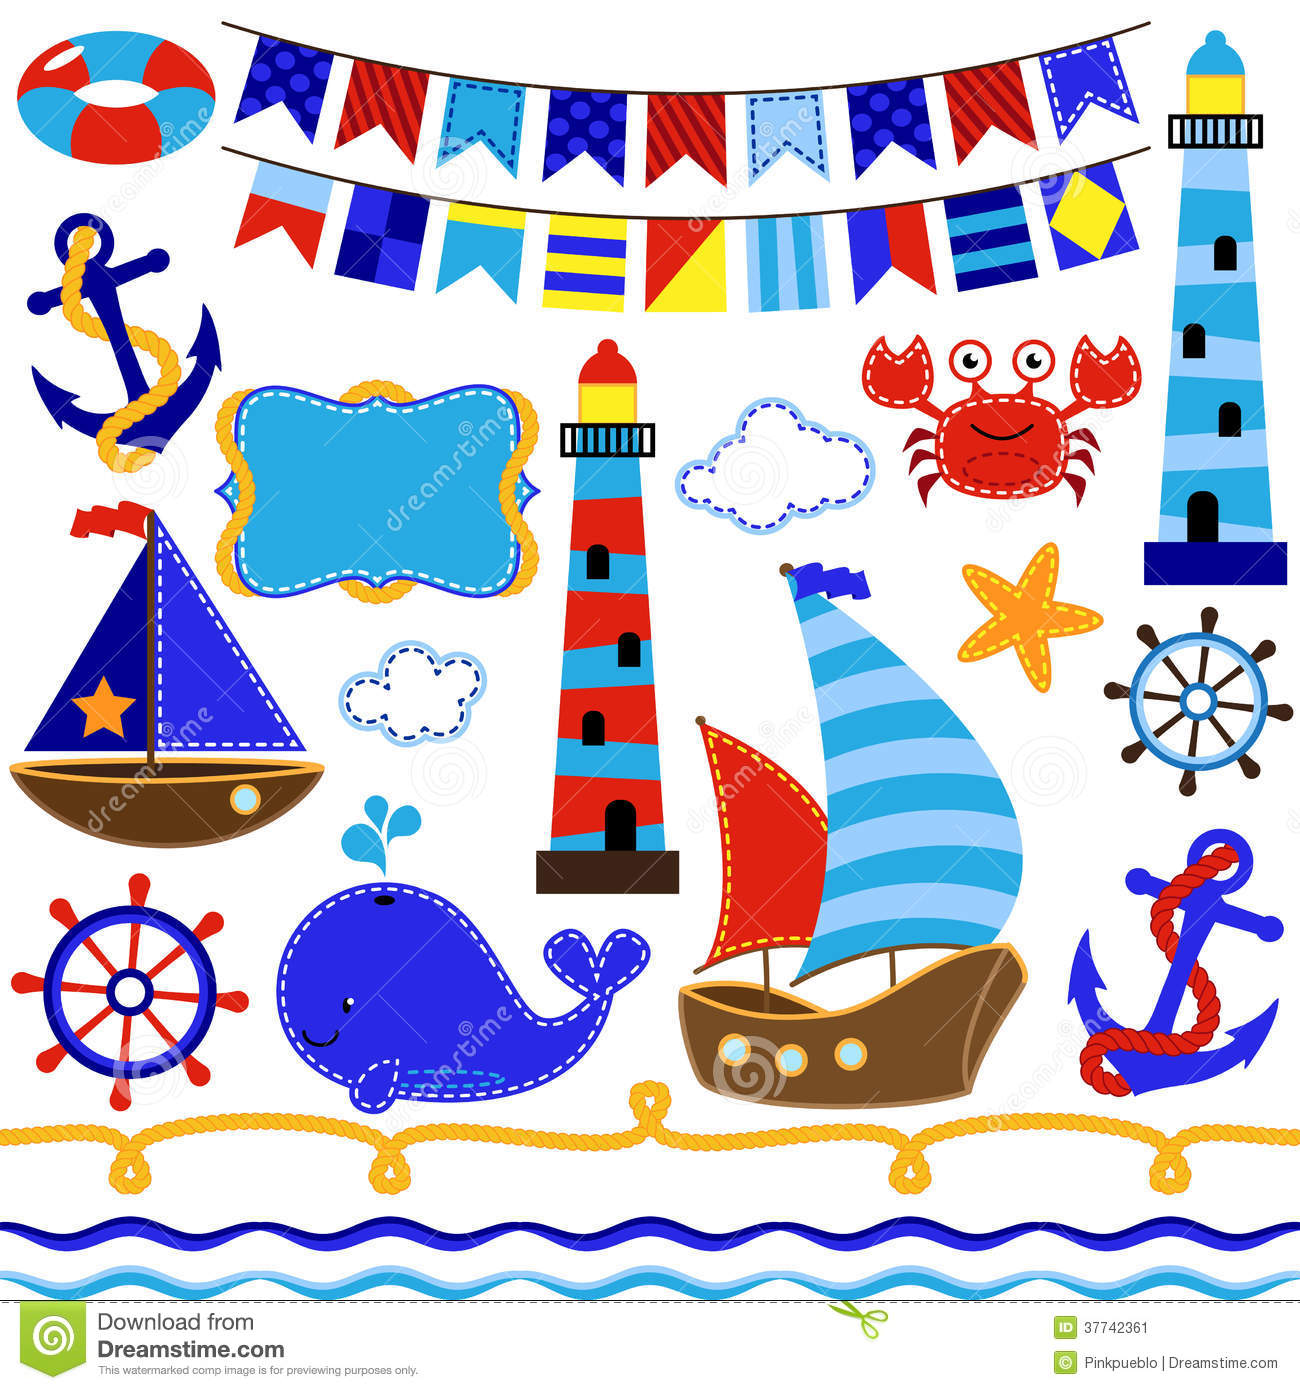 Vector Set Of Nautical And Sailing Themed Elements Stock Image   Image    